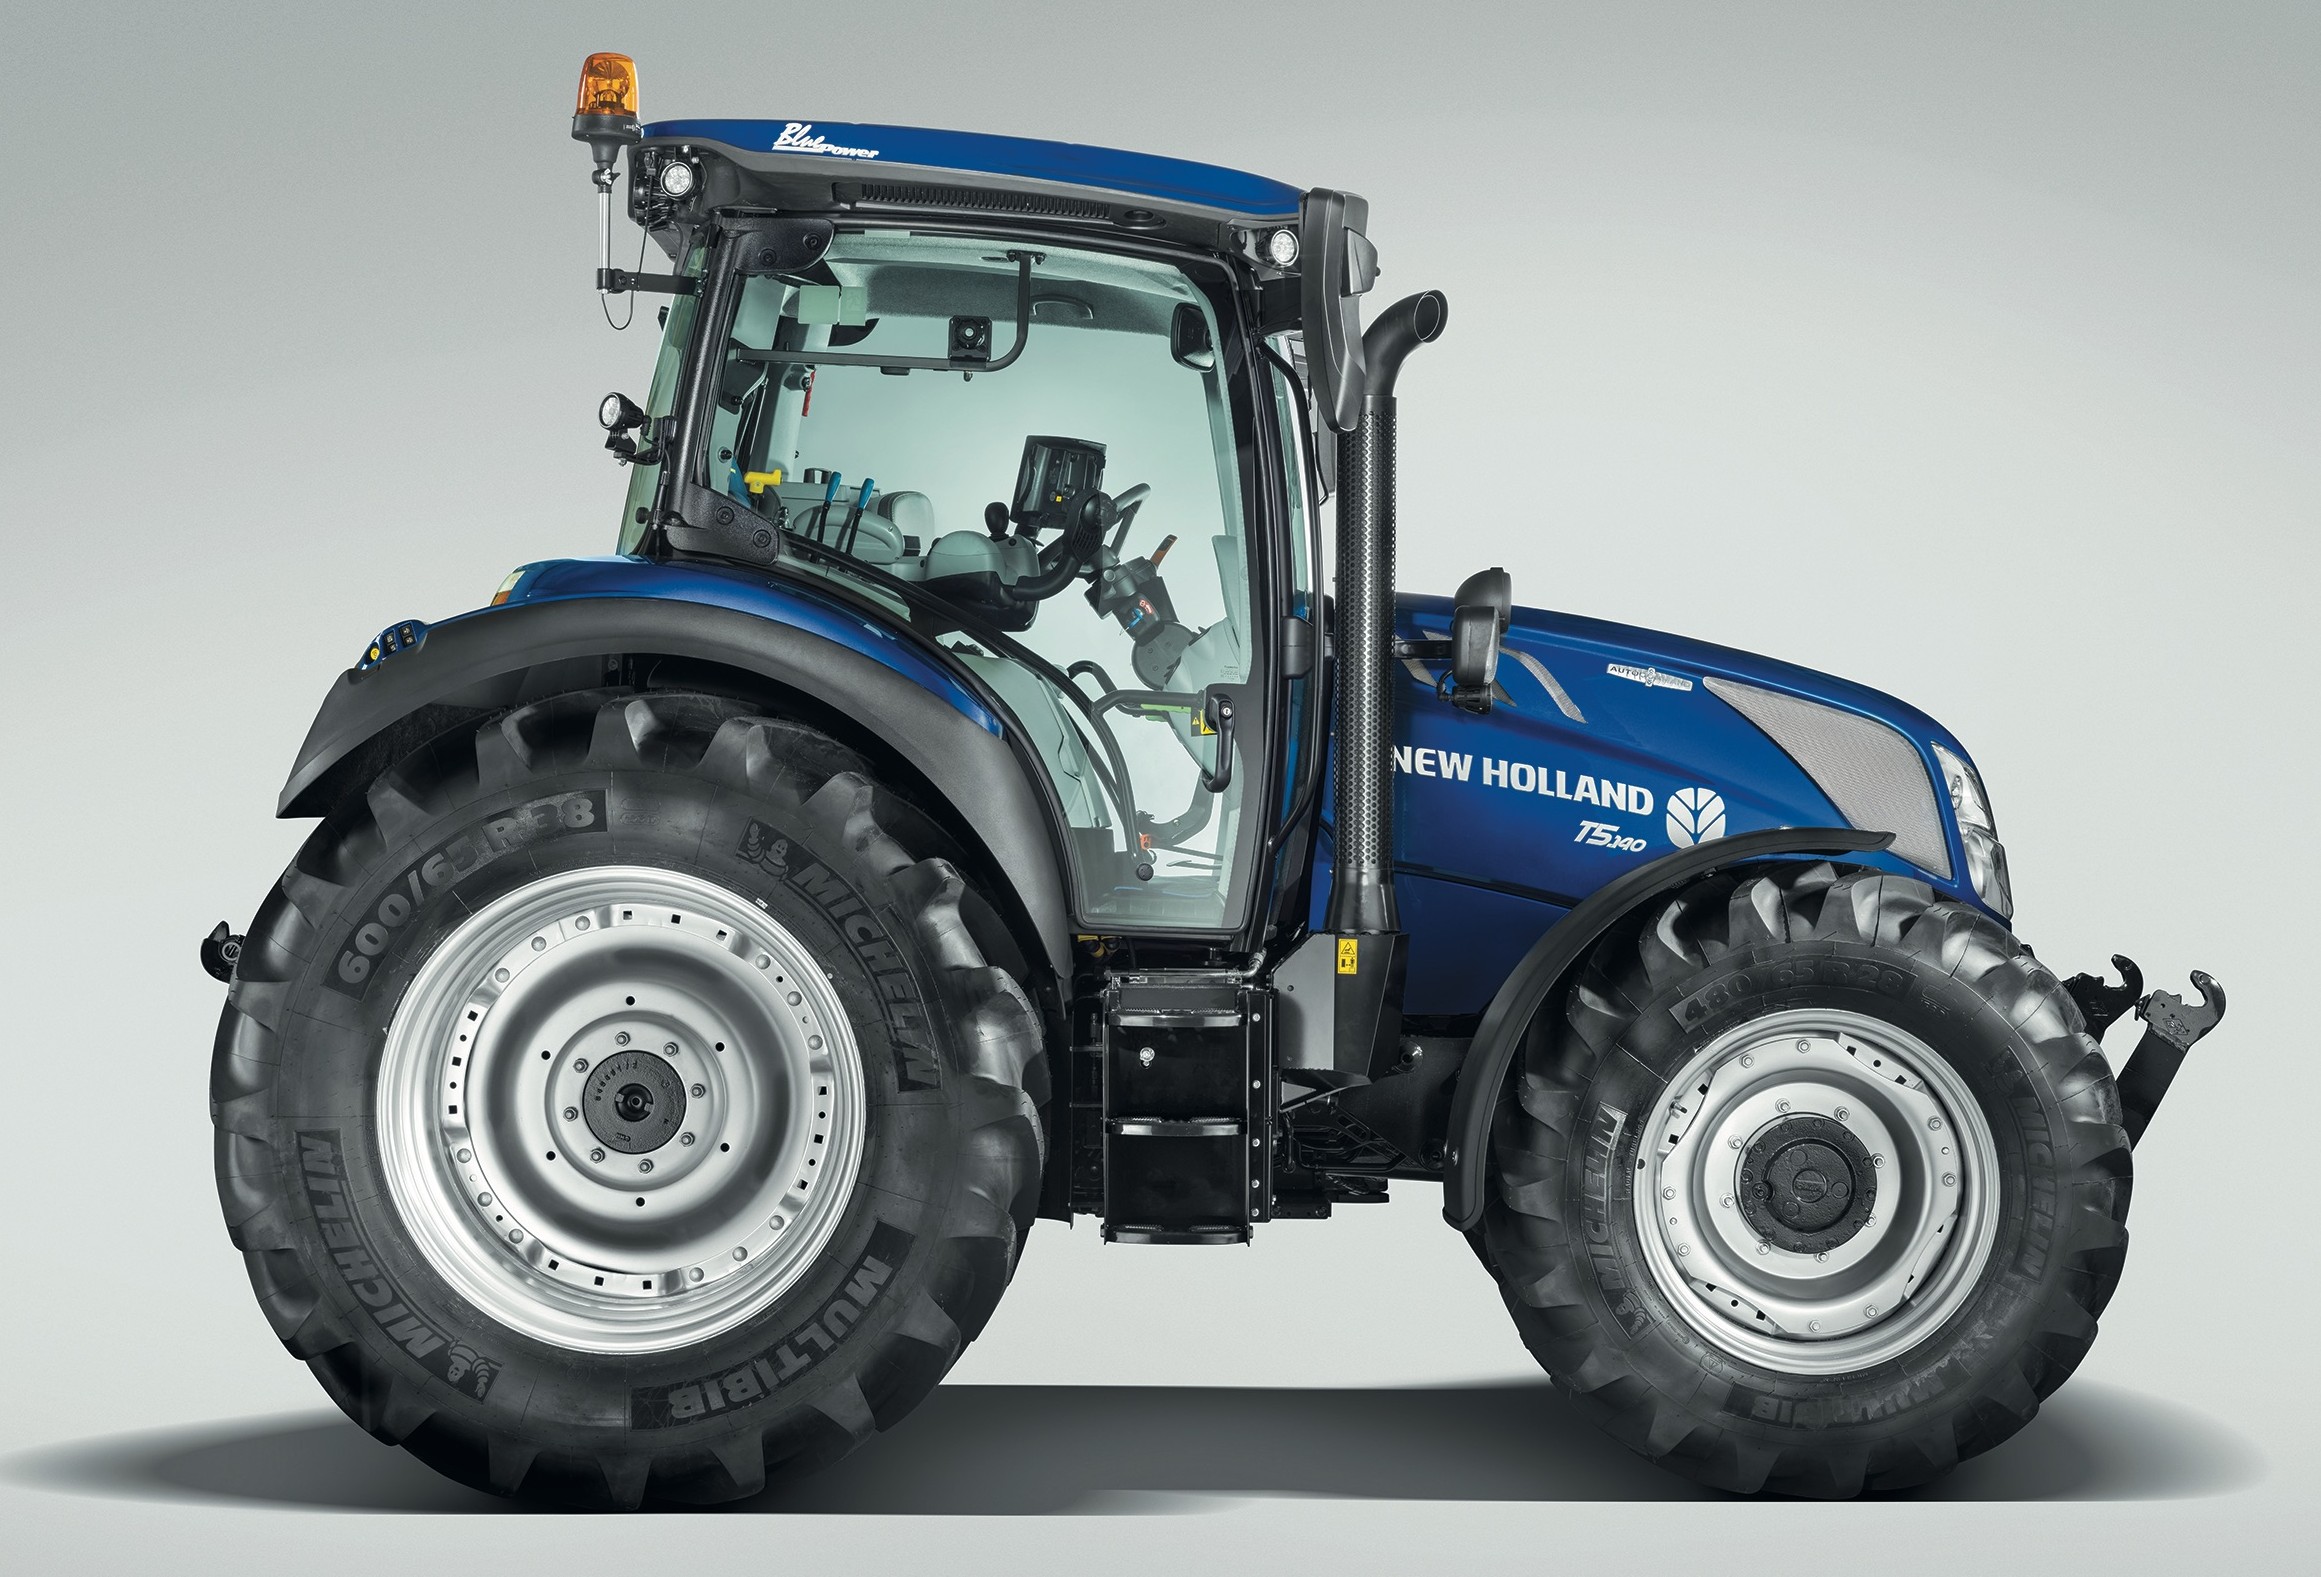 New holland t. Трактор New Holland t7060. Трактор New Holland t6070. New Holland t7000. Трактор Нью Холланд т9030.